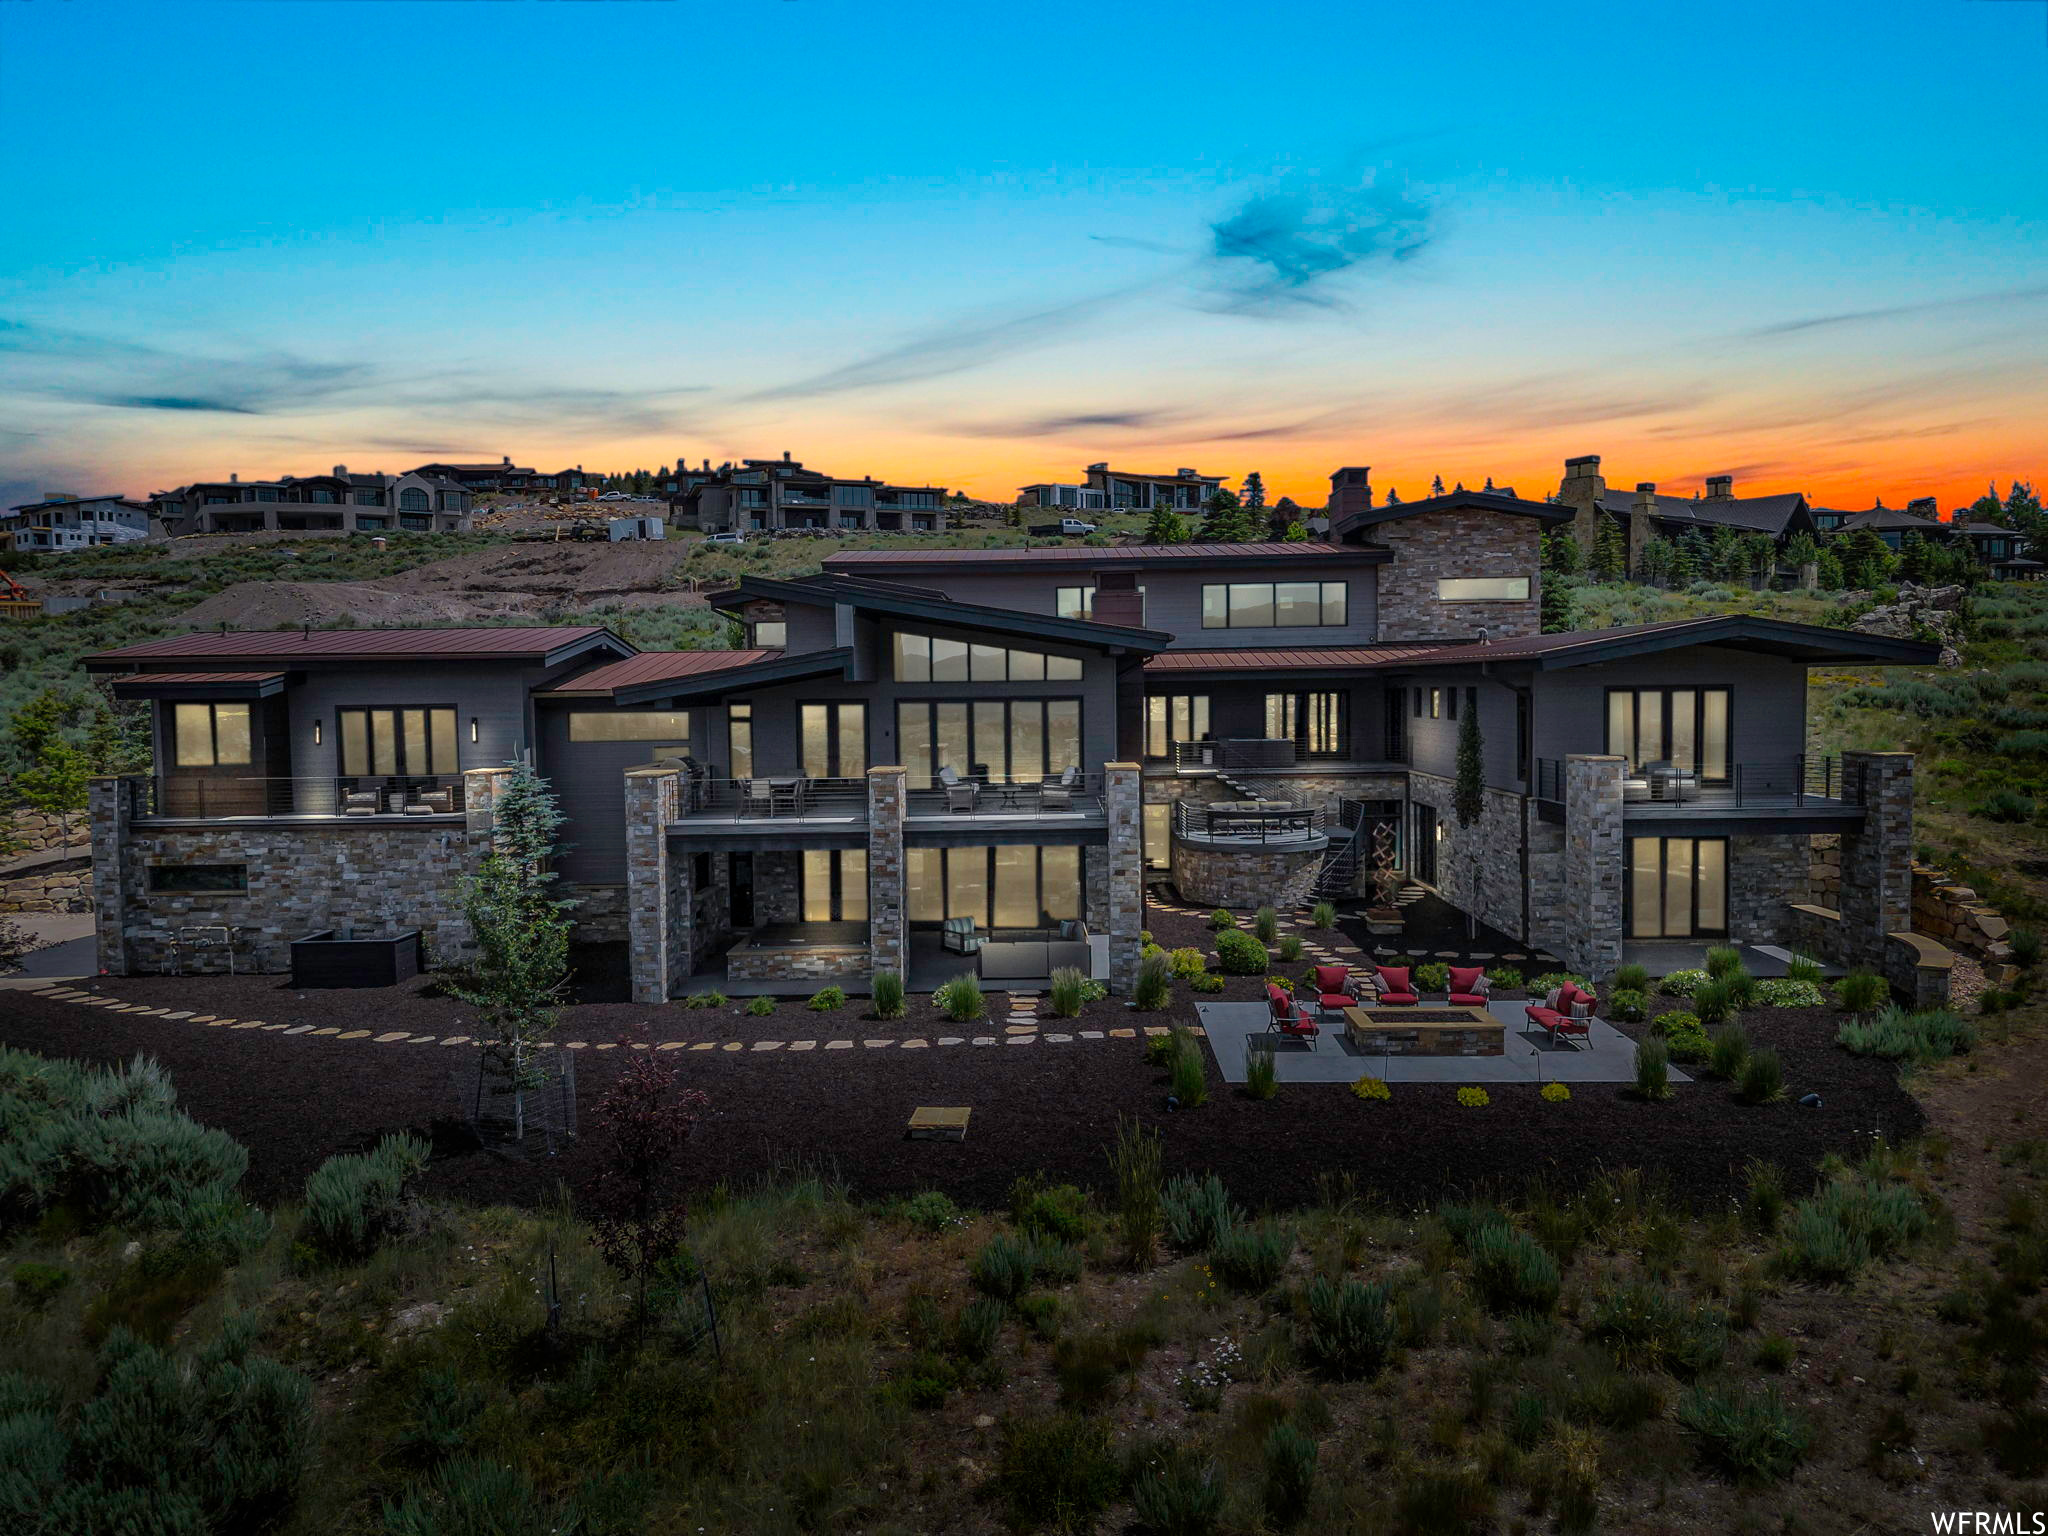 3270 CENTRAL PACIFIC, Park City, Utah 84098, 6 Bedrooms Bedrooms, 26 Rooms Rooms,2 BathroomsBathrooms,Residential,For sale,CENTRAL PACIFIC,1892635